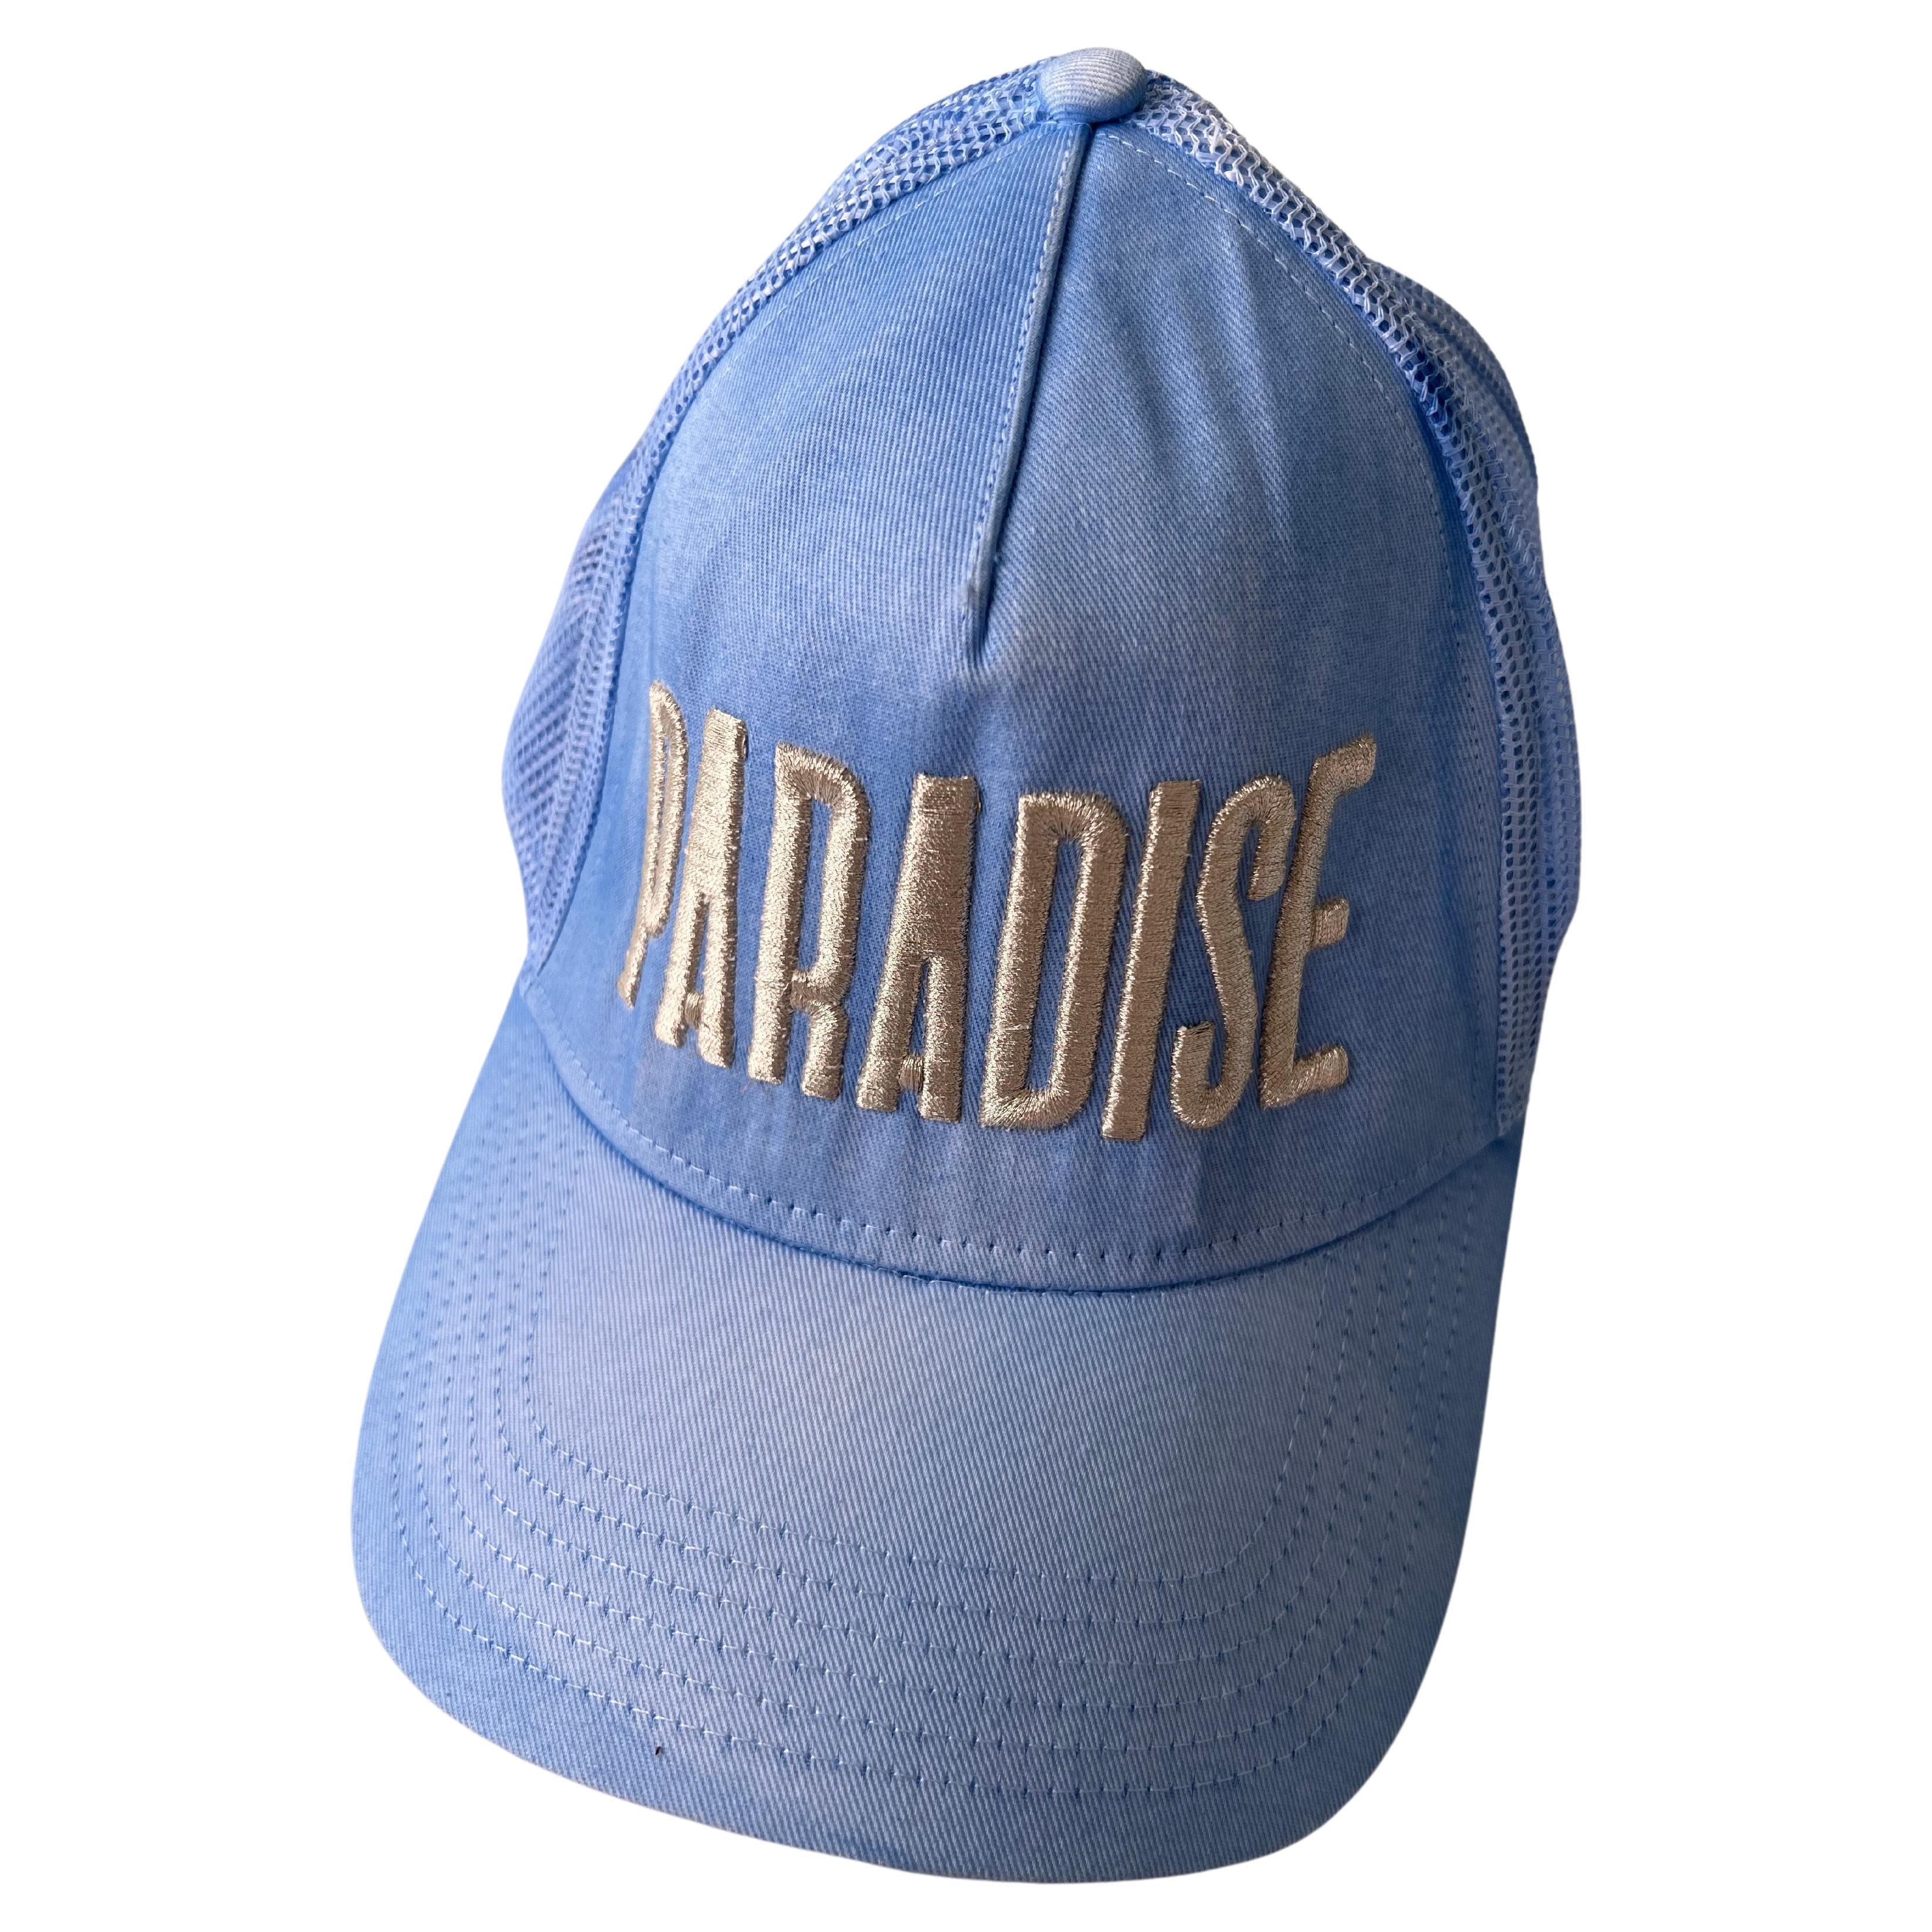 Brand: J Dauphin
Hat Light Blue Trucker Paradise Silver Embroidery J Dauphin

Embroidery Made in LA

Express a hybrid of easy-luxe and bourgeoisie jet-set look. Effortless and versatile, elegant and classy they bring an allure of unexpected